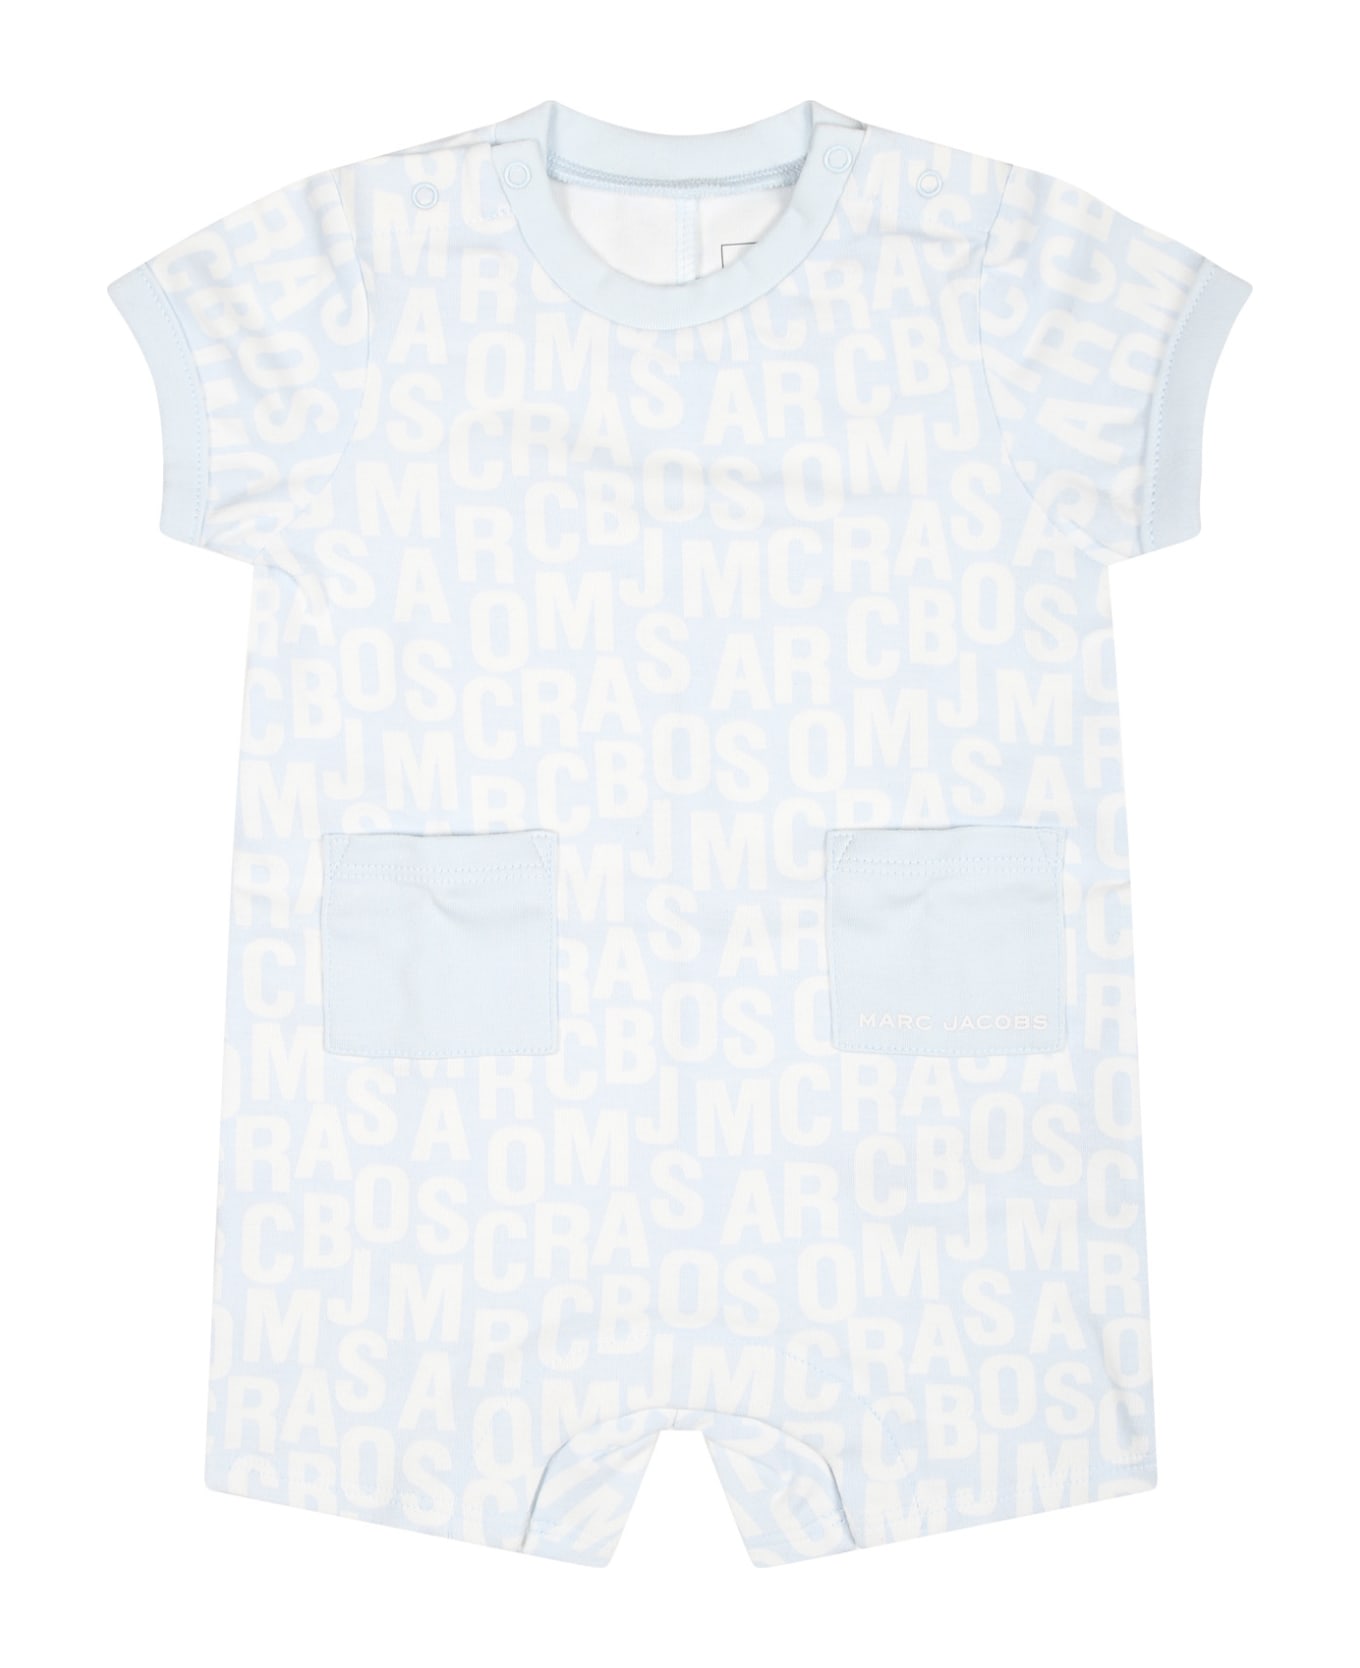 Marc Jacobs Light Blue Romper For Baby Boy With Logo - Light Blue